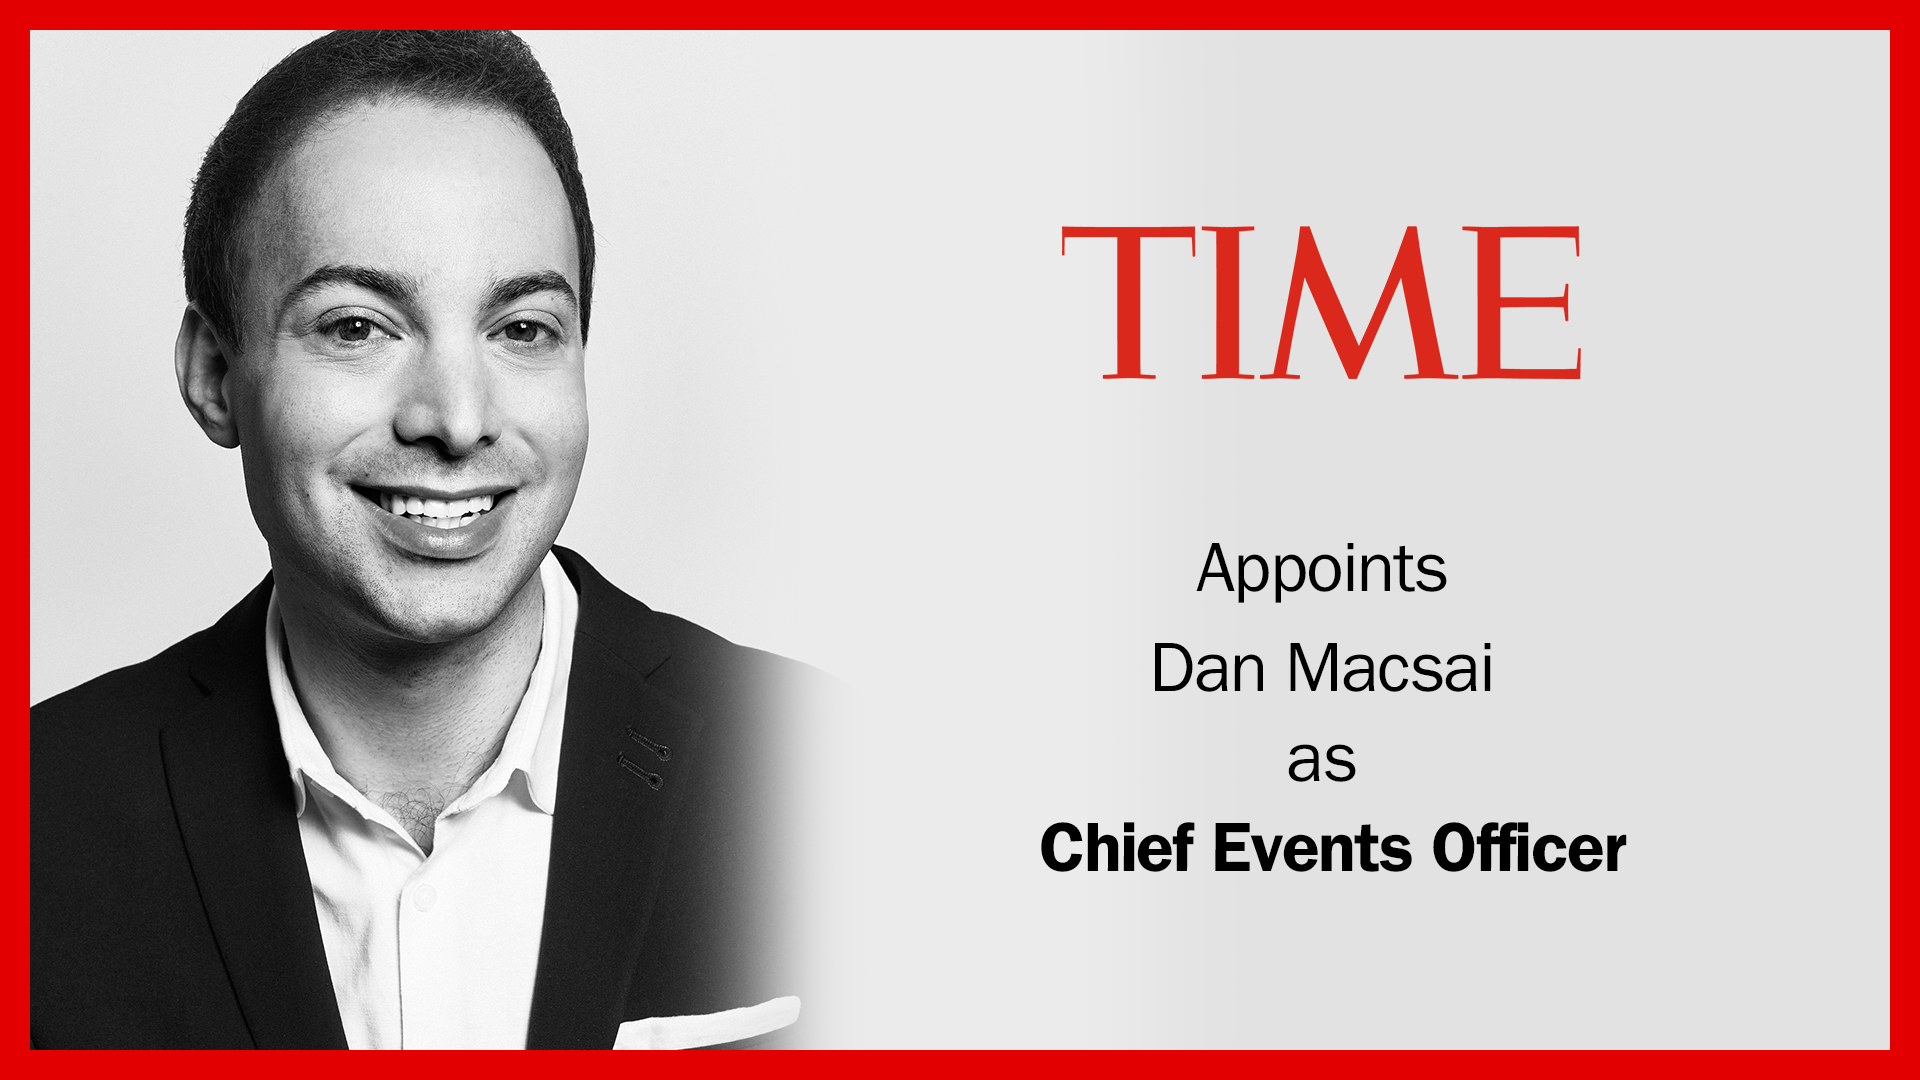 TIME Appoints Dan Macsai as Chief Events Officer
                      
                      
                        By TIME PR